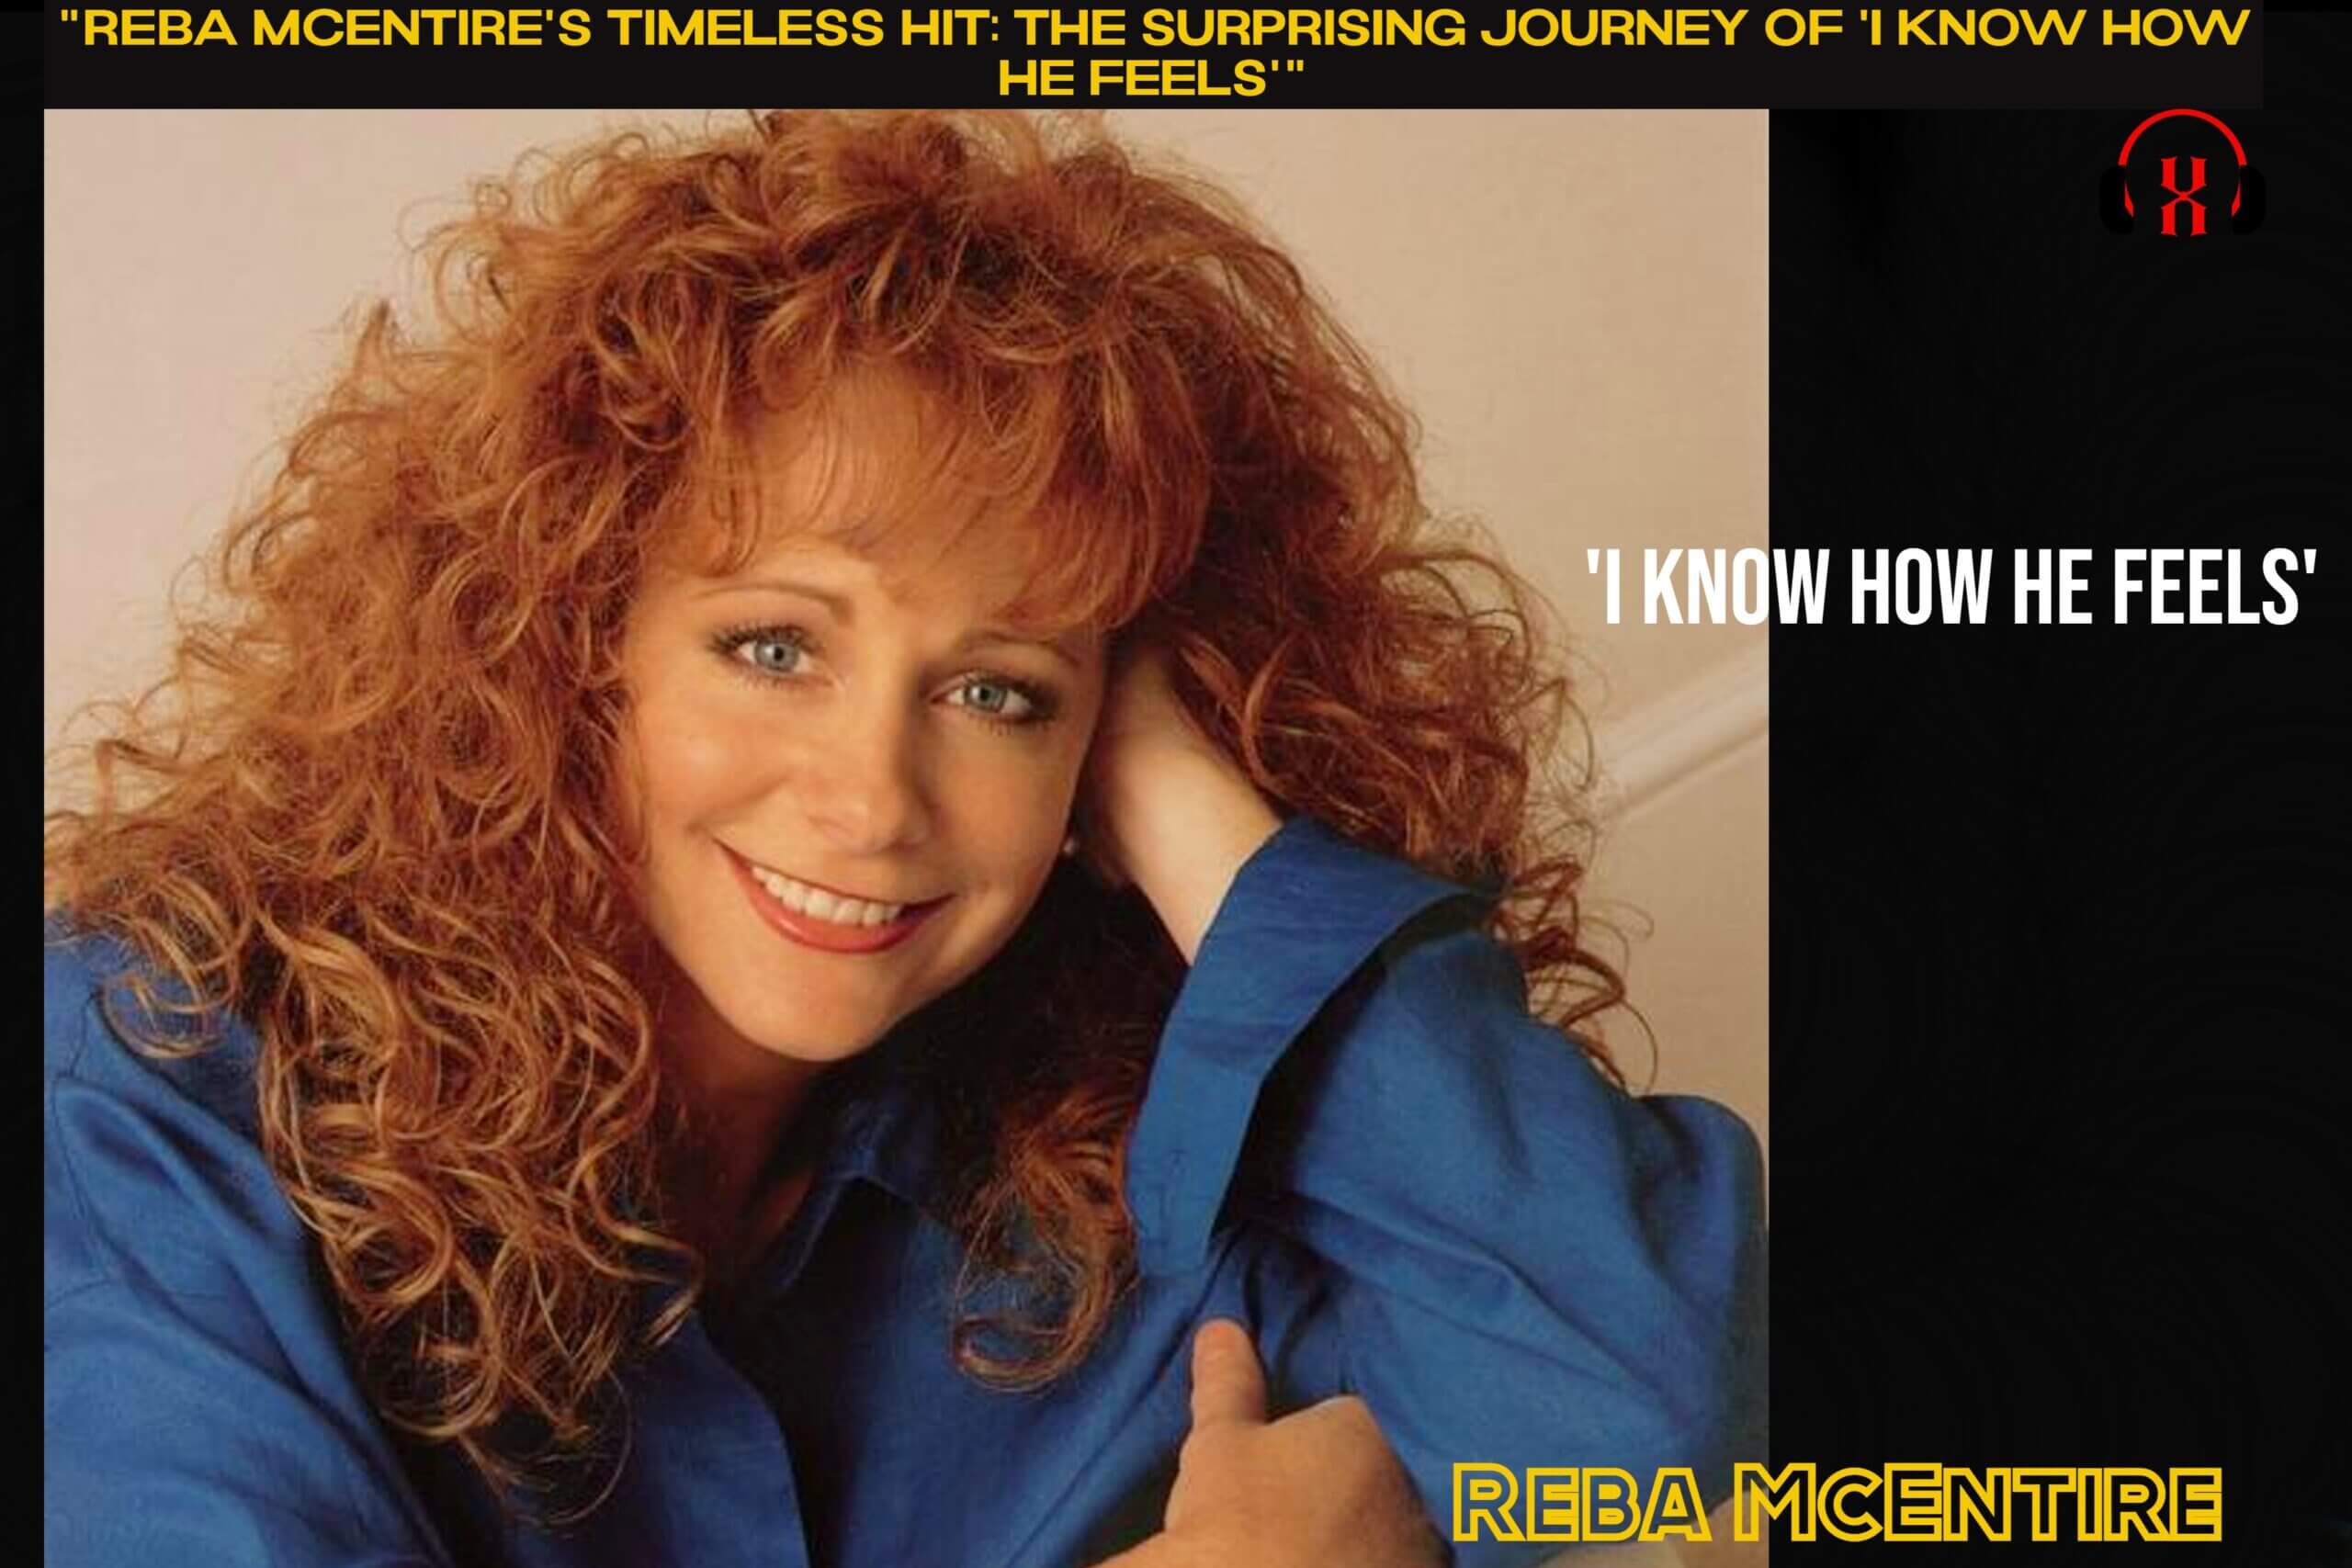 “Reba McEntire’s Timeless Hit: The Surprising Journey of ‘I Know How He Feels'”